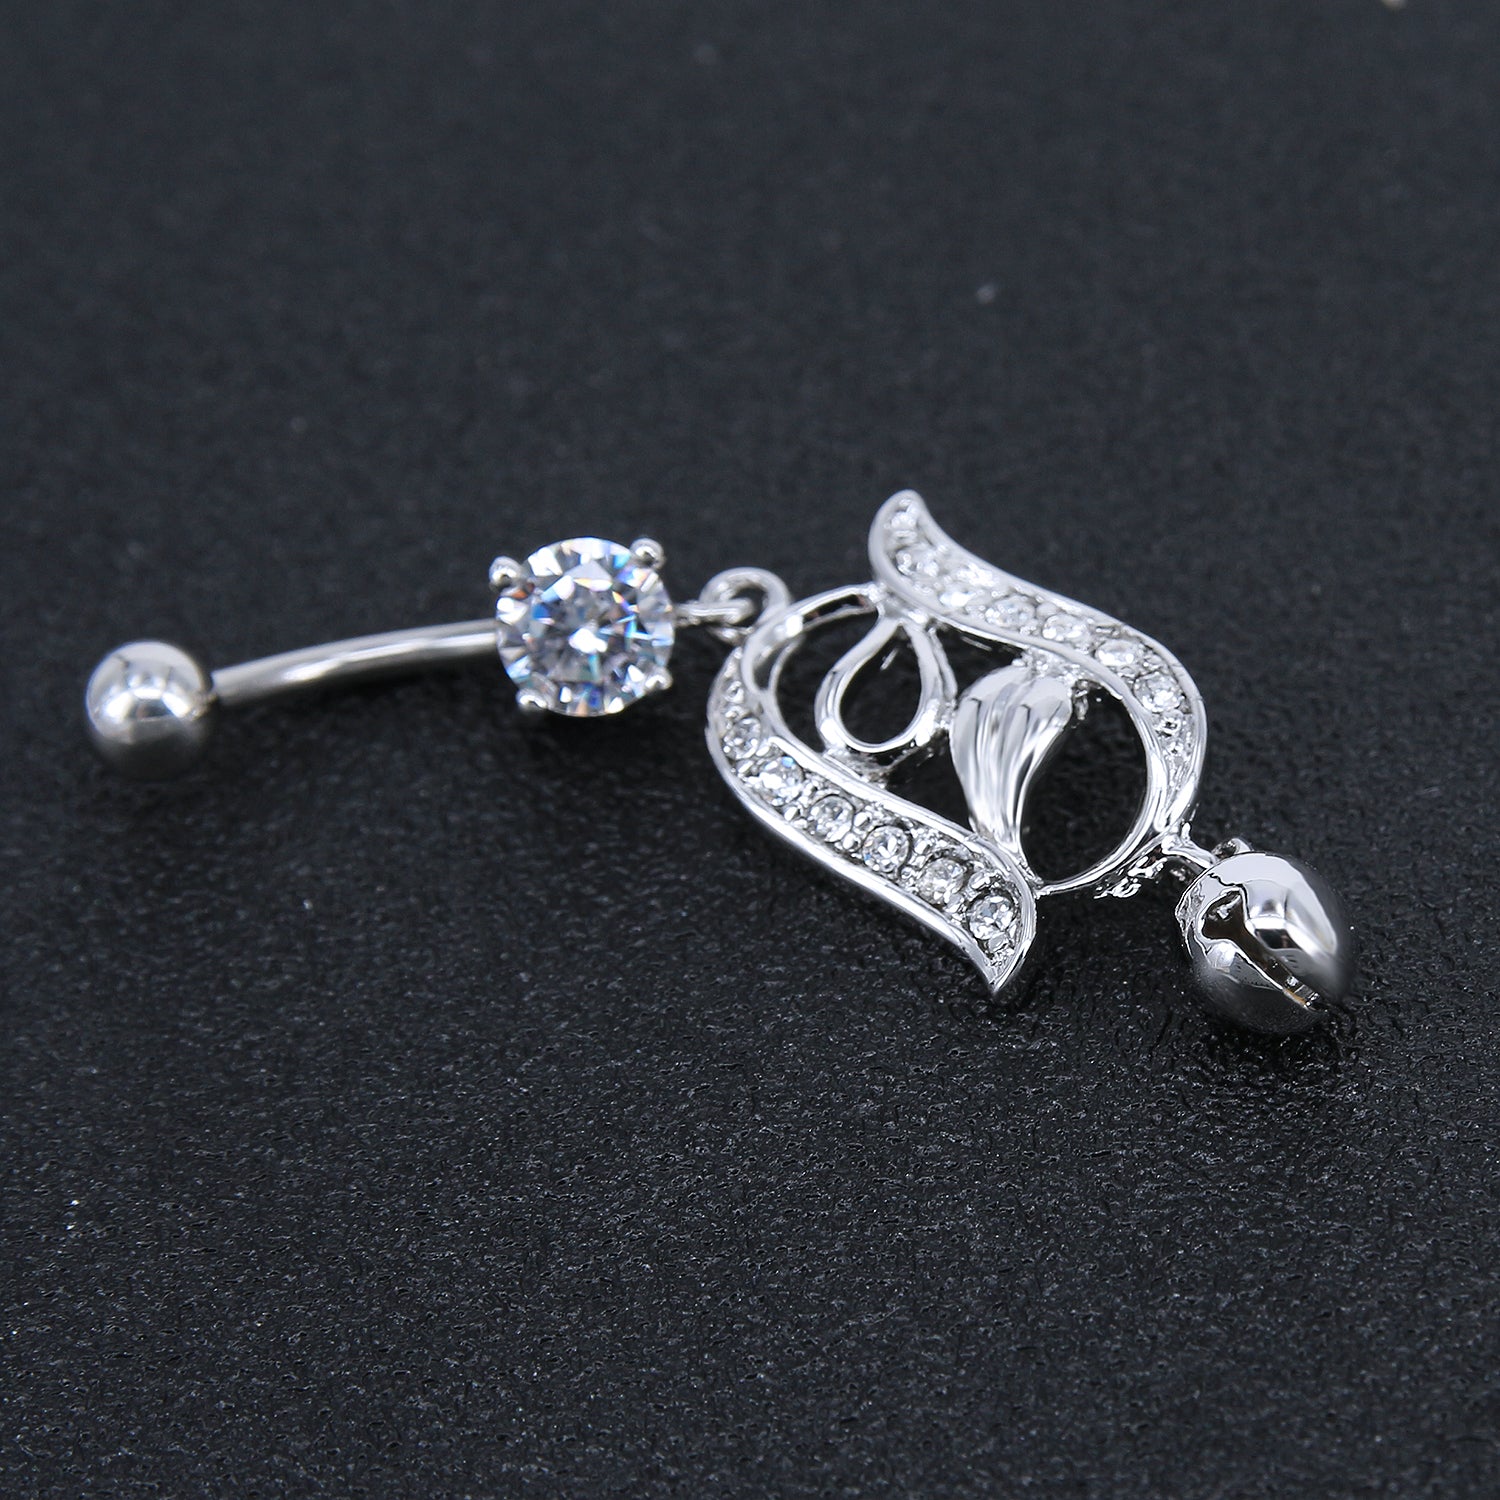 14g-Leaf-Cubic-Zirconia-Belly-Button-Rings-Bell-Dangle-Belly-Rings-Piercing-Jewelry